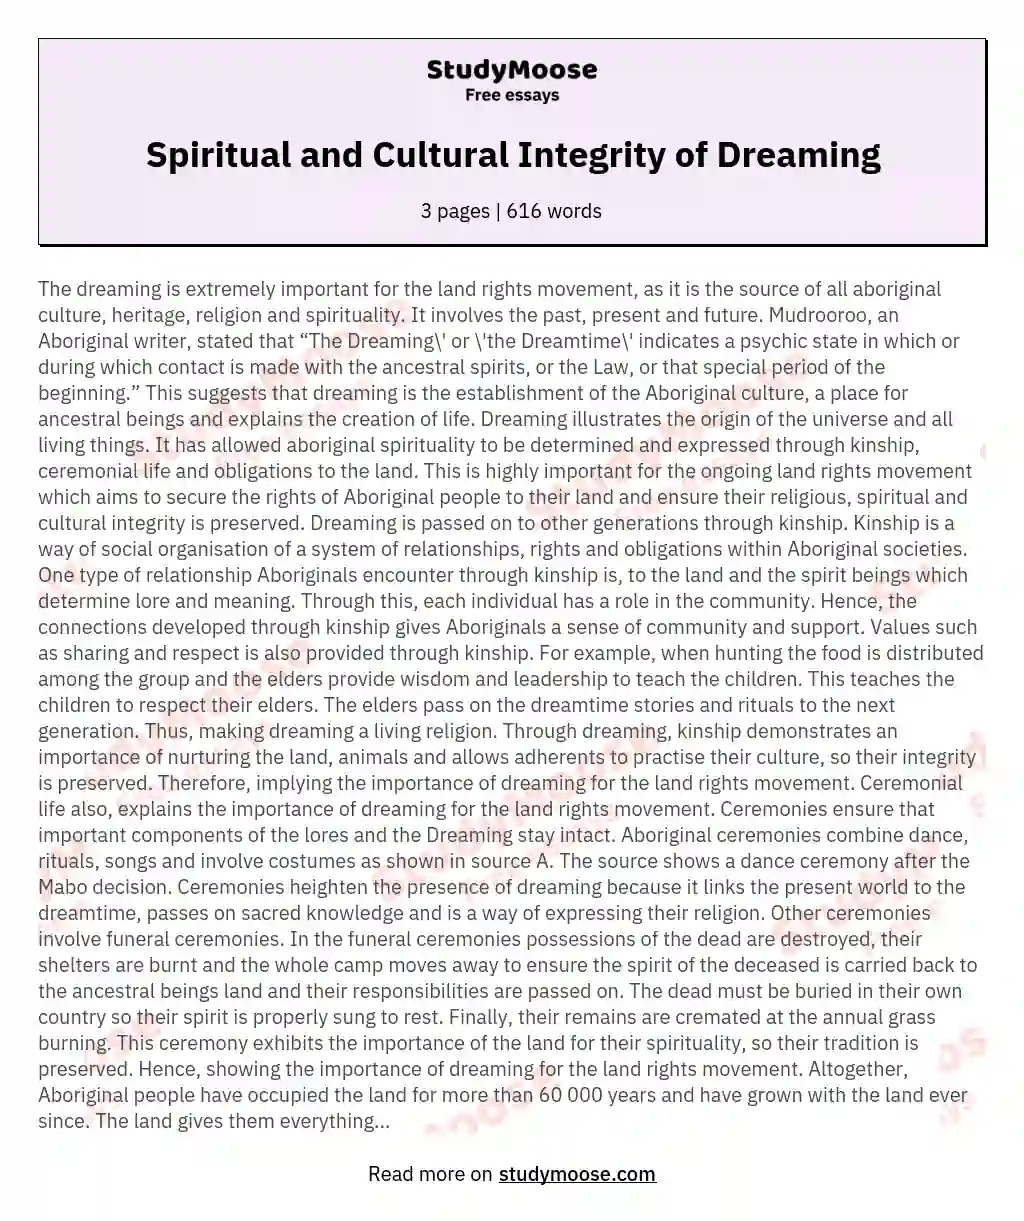 Spiritual and Cultural Integrity of Dreaming essay